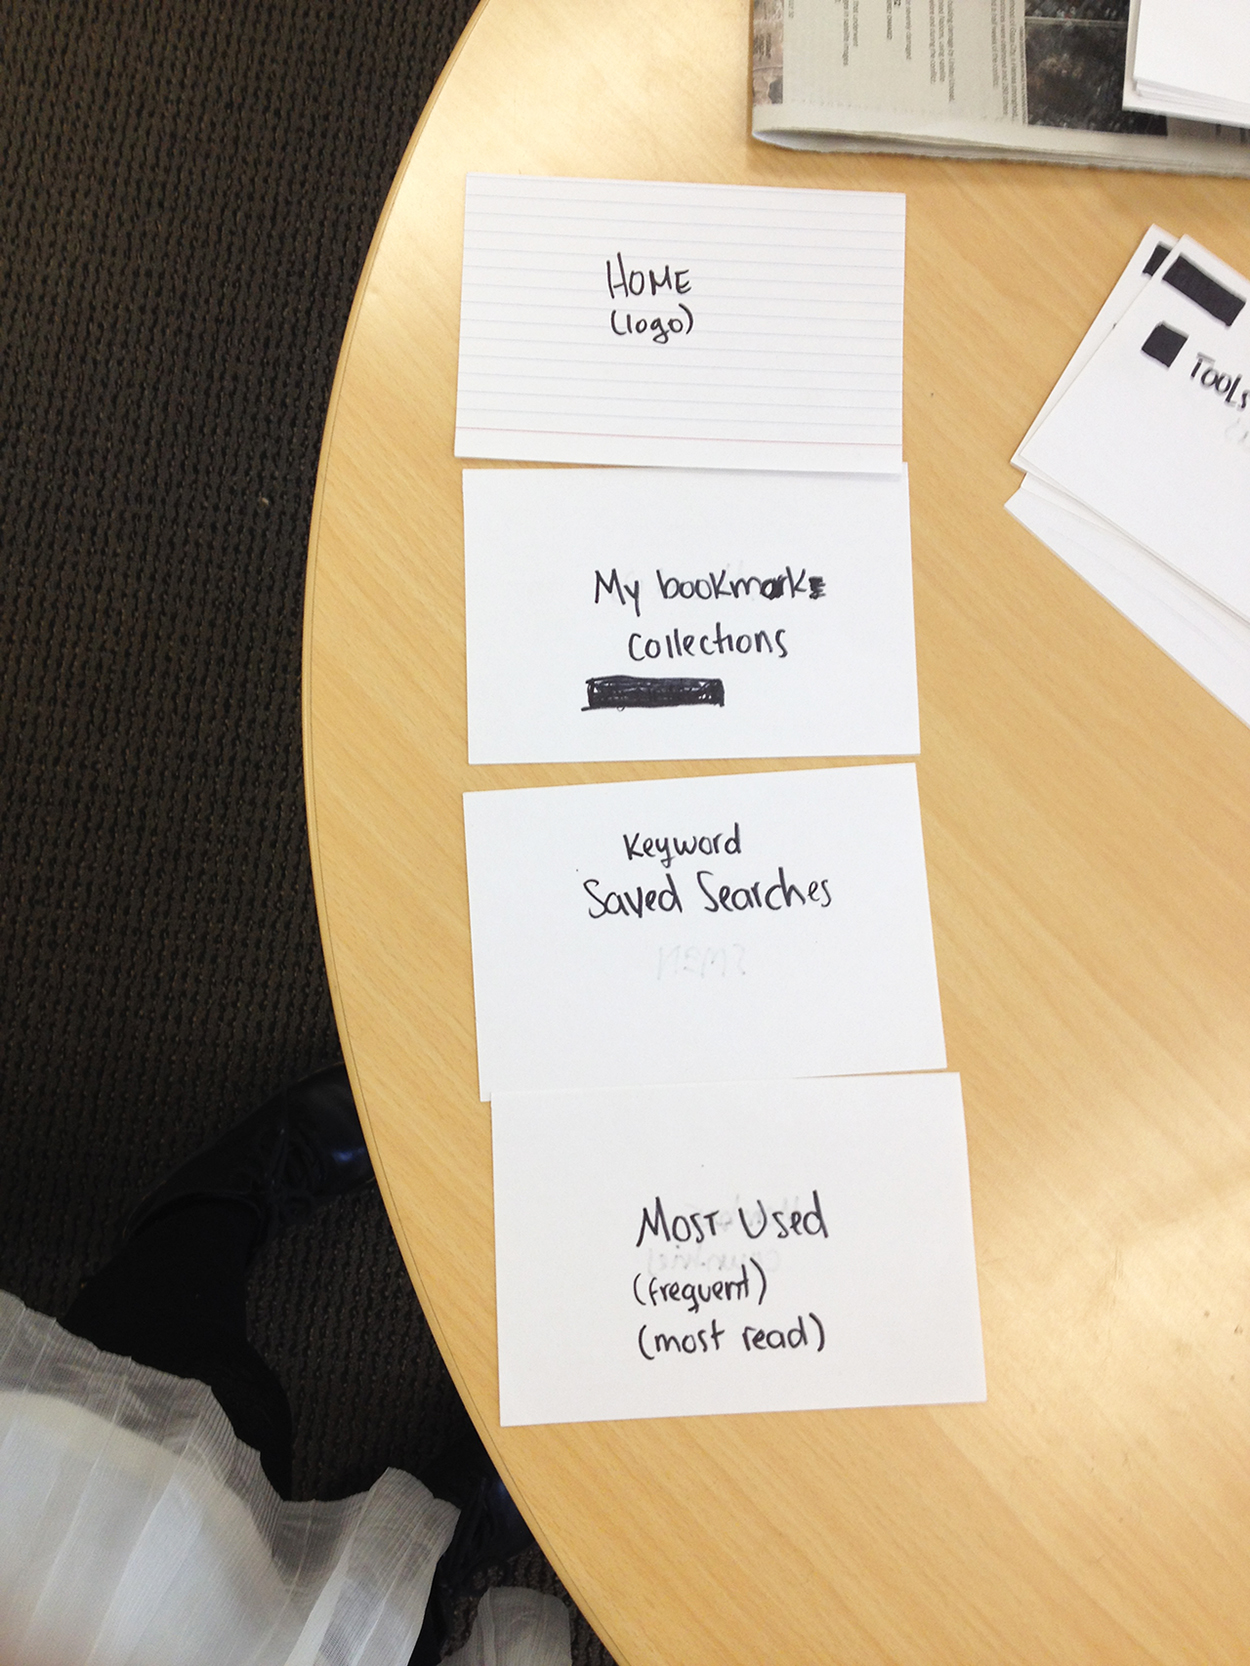 Image of cards on the table from cards sorting exercise